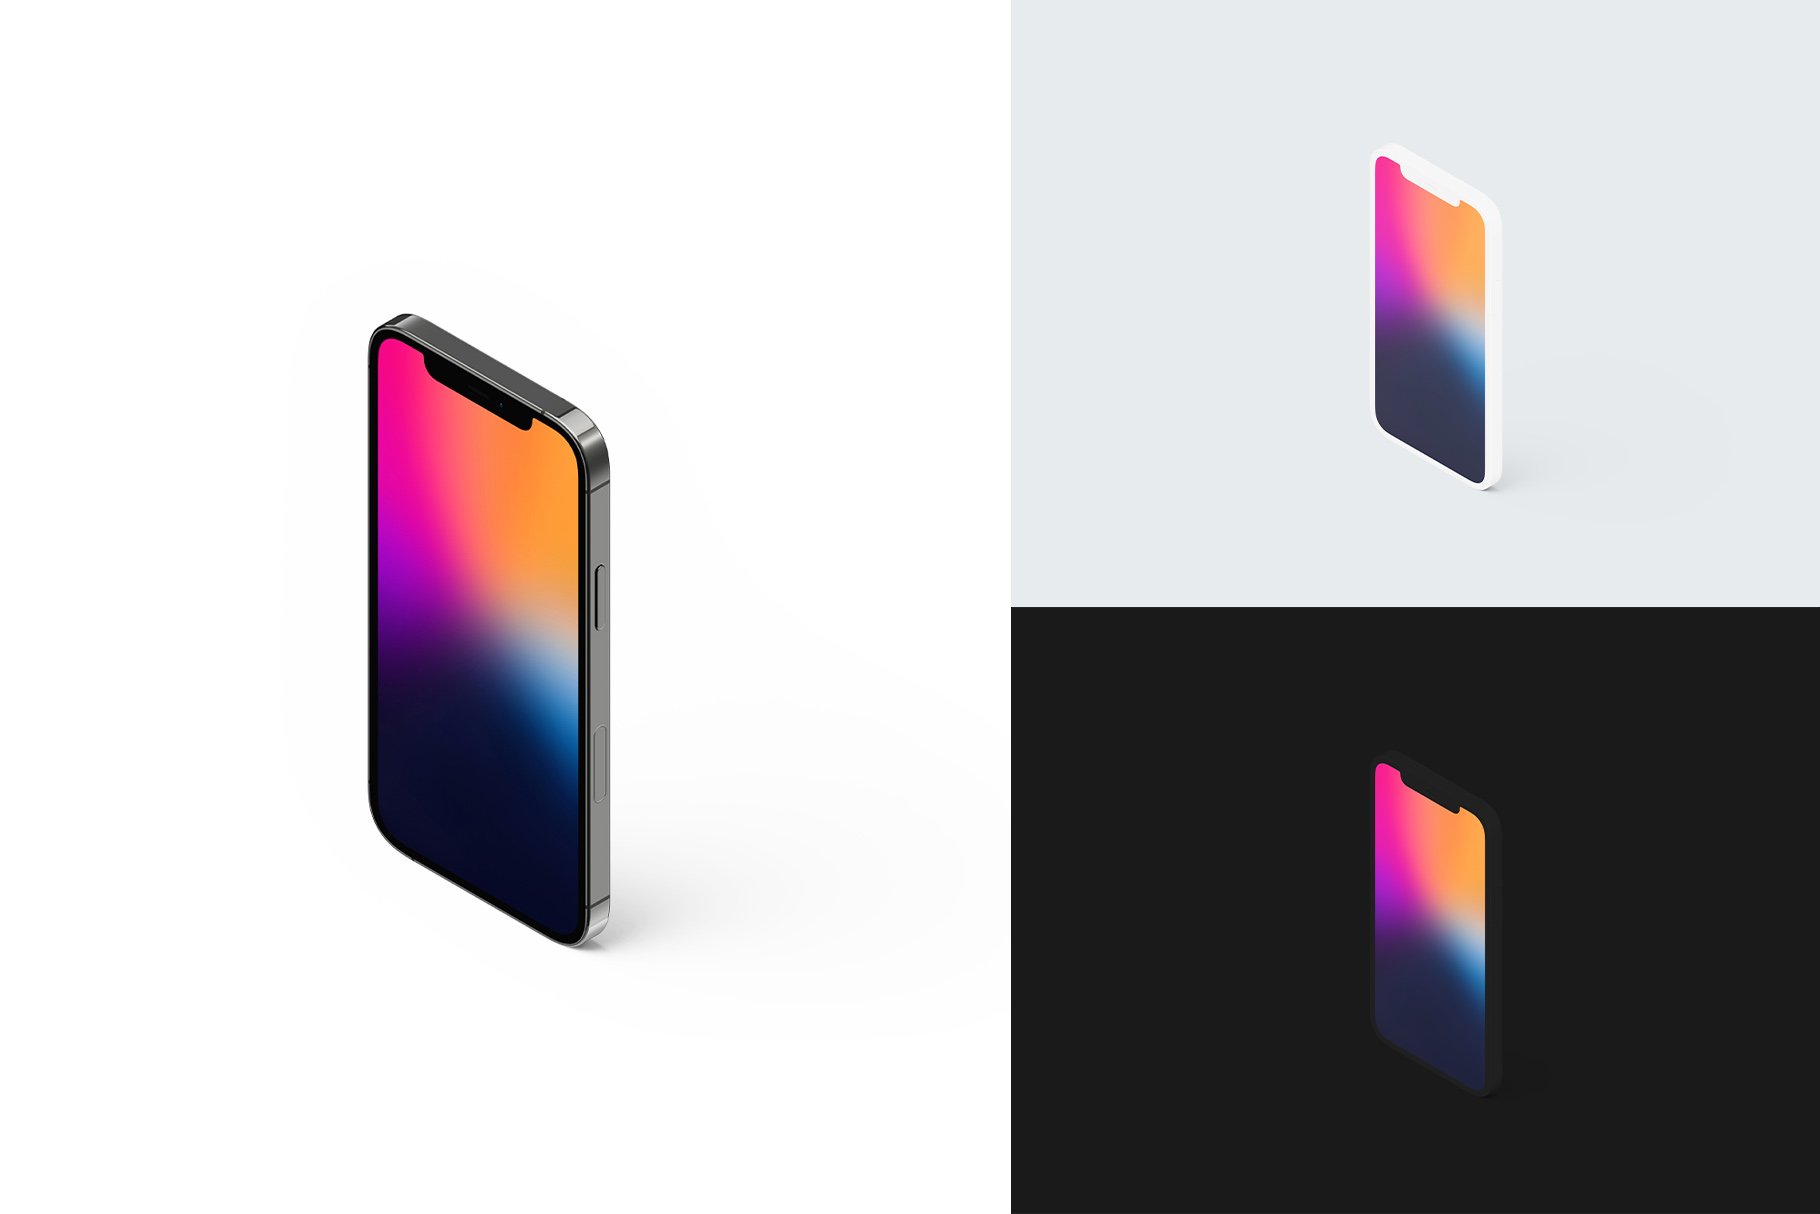 iphone 12 pro mockup pack by anthony boyd graphics 2811c29 313